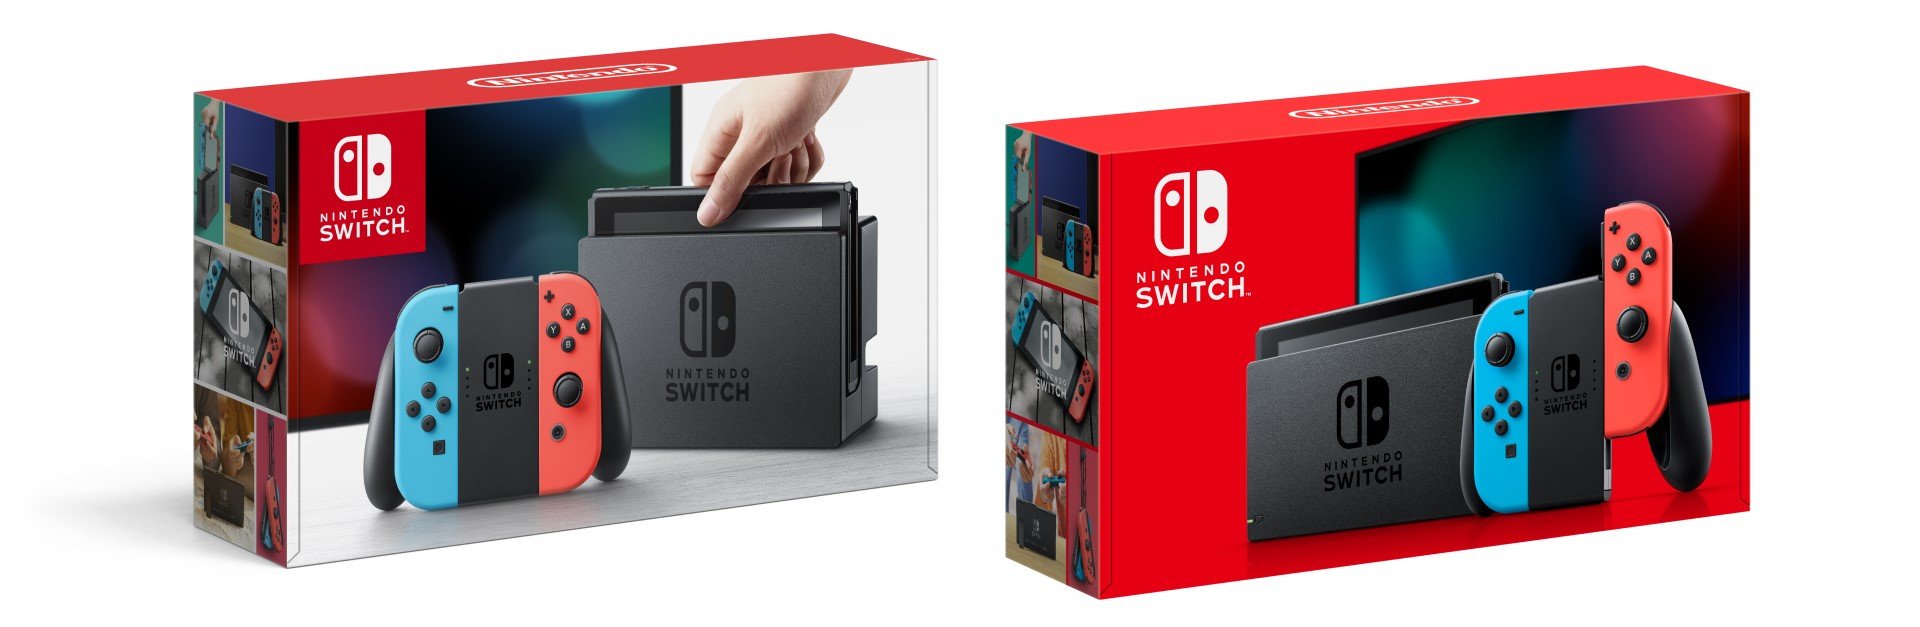 Where To Buy The New Nintendo Switch With Better Battery Life And